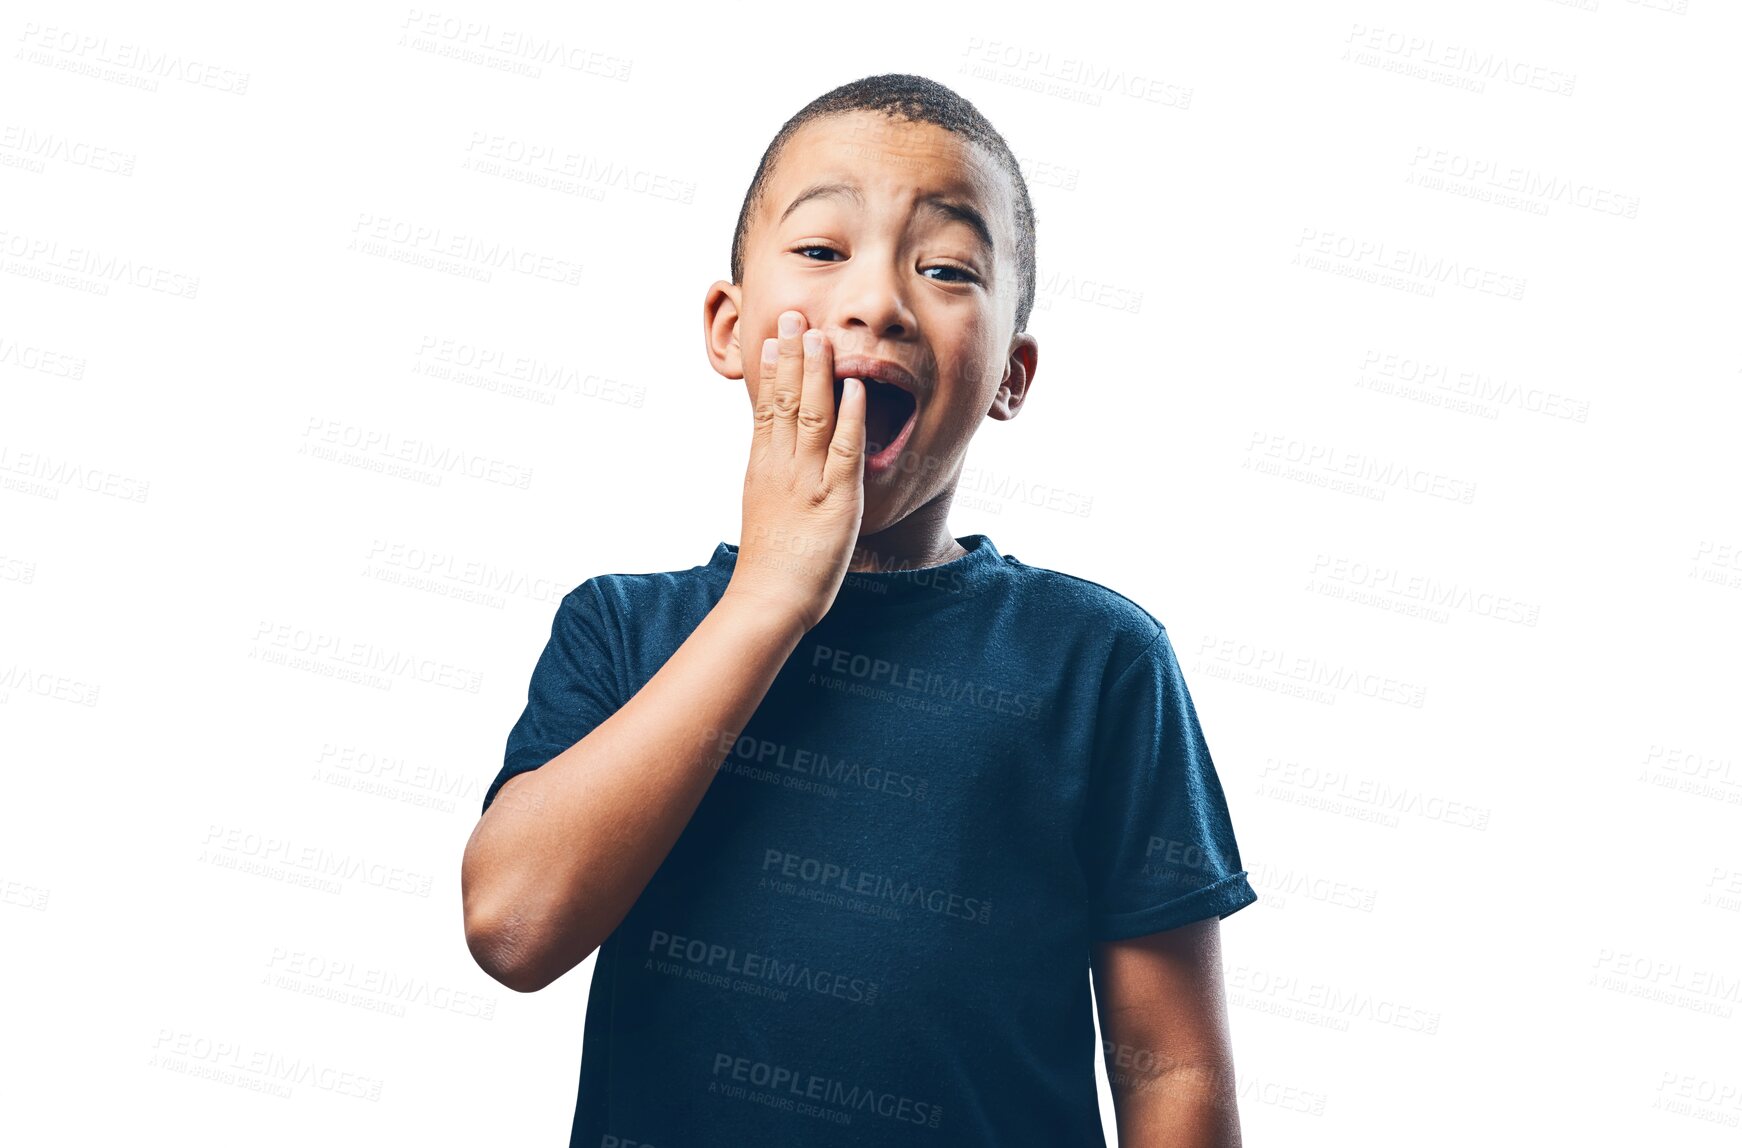 Buy stock photo Young boy, happy surprise in portrait and amazed with facial expression isolated on png transparent background. Shock face, wow and emoji, male child with wonder and reaction to news or announcement